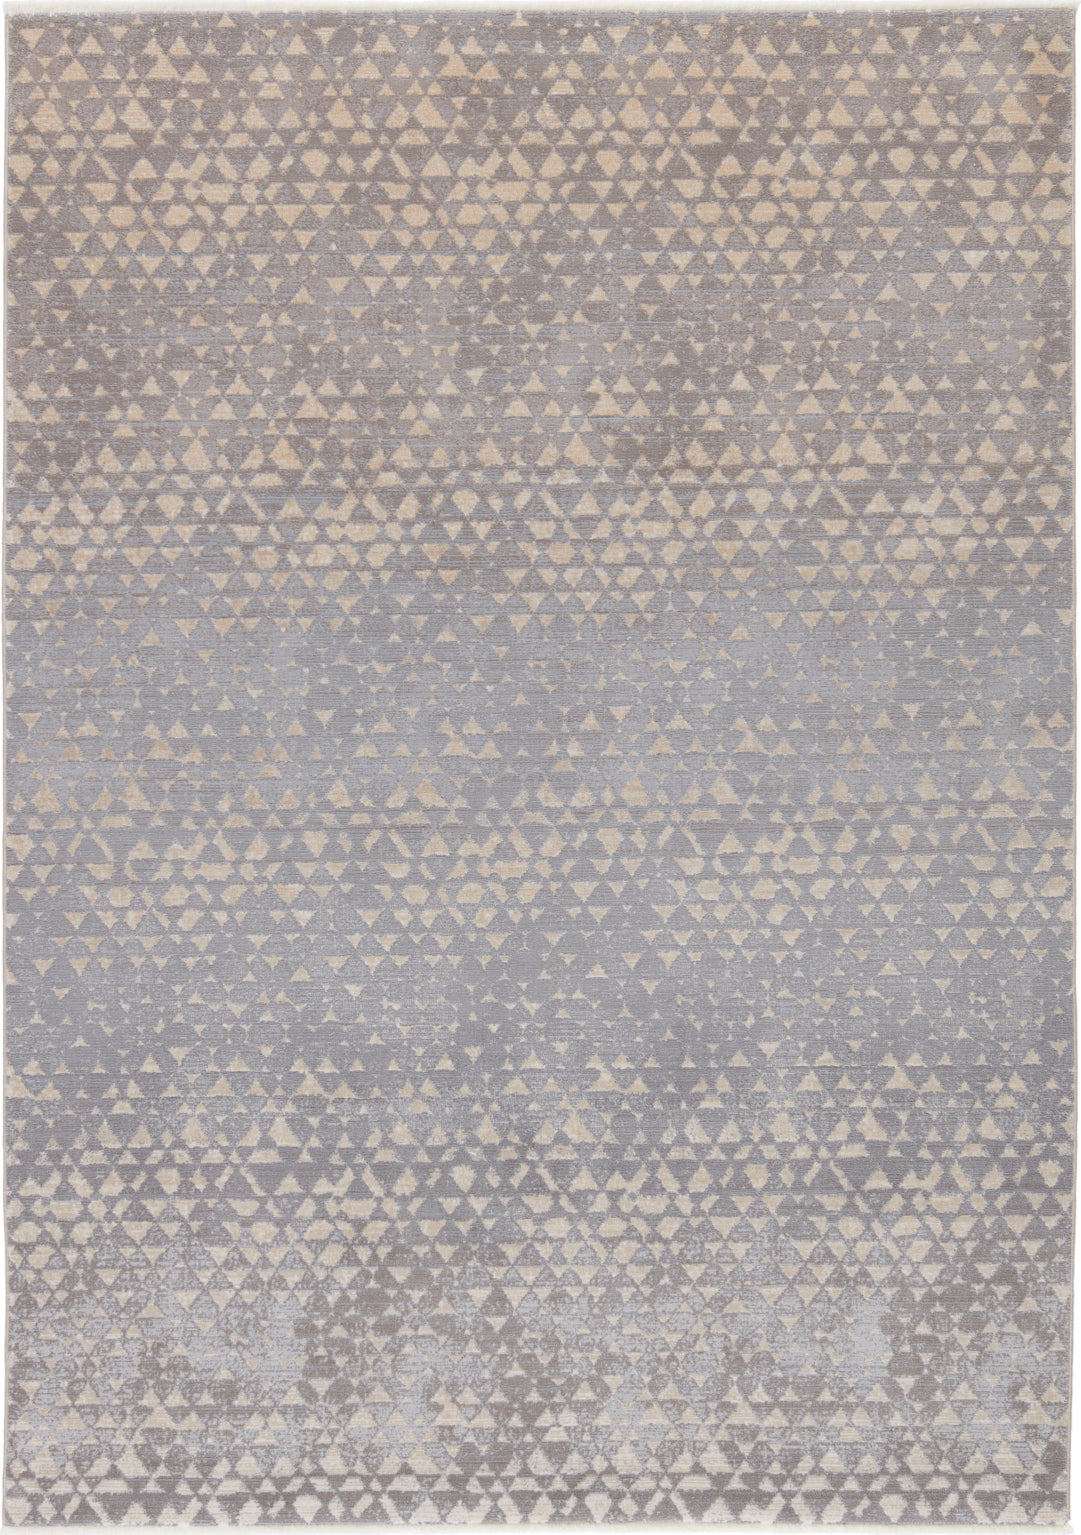 Jaipur Living Land Sea Sky Sierra Gray/Taupe Area Rug by Kevin O'Brien - Top Down